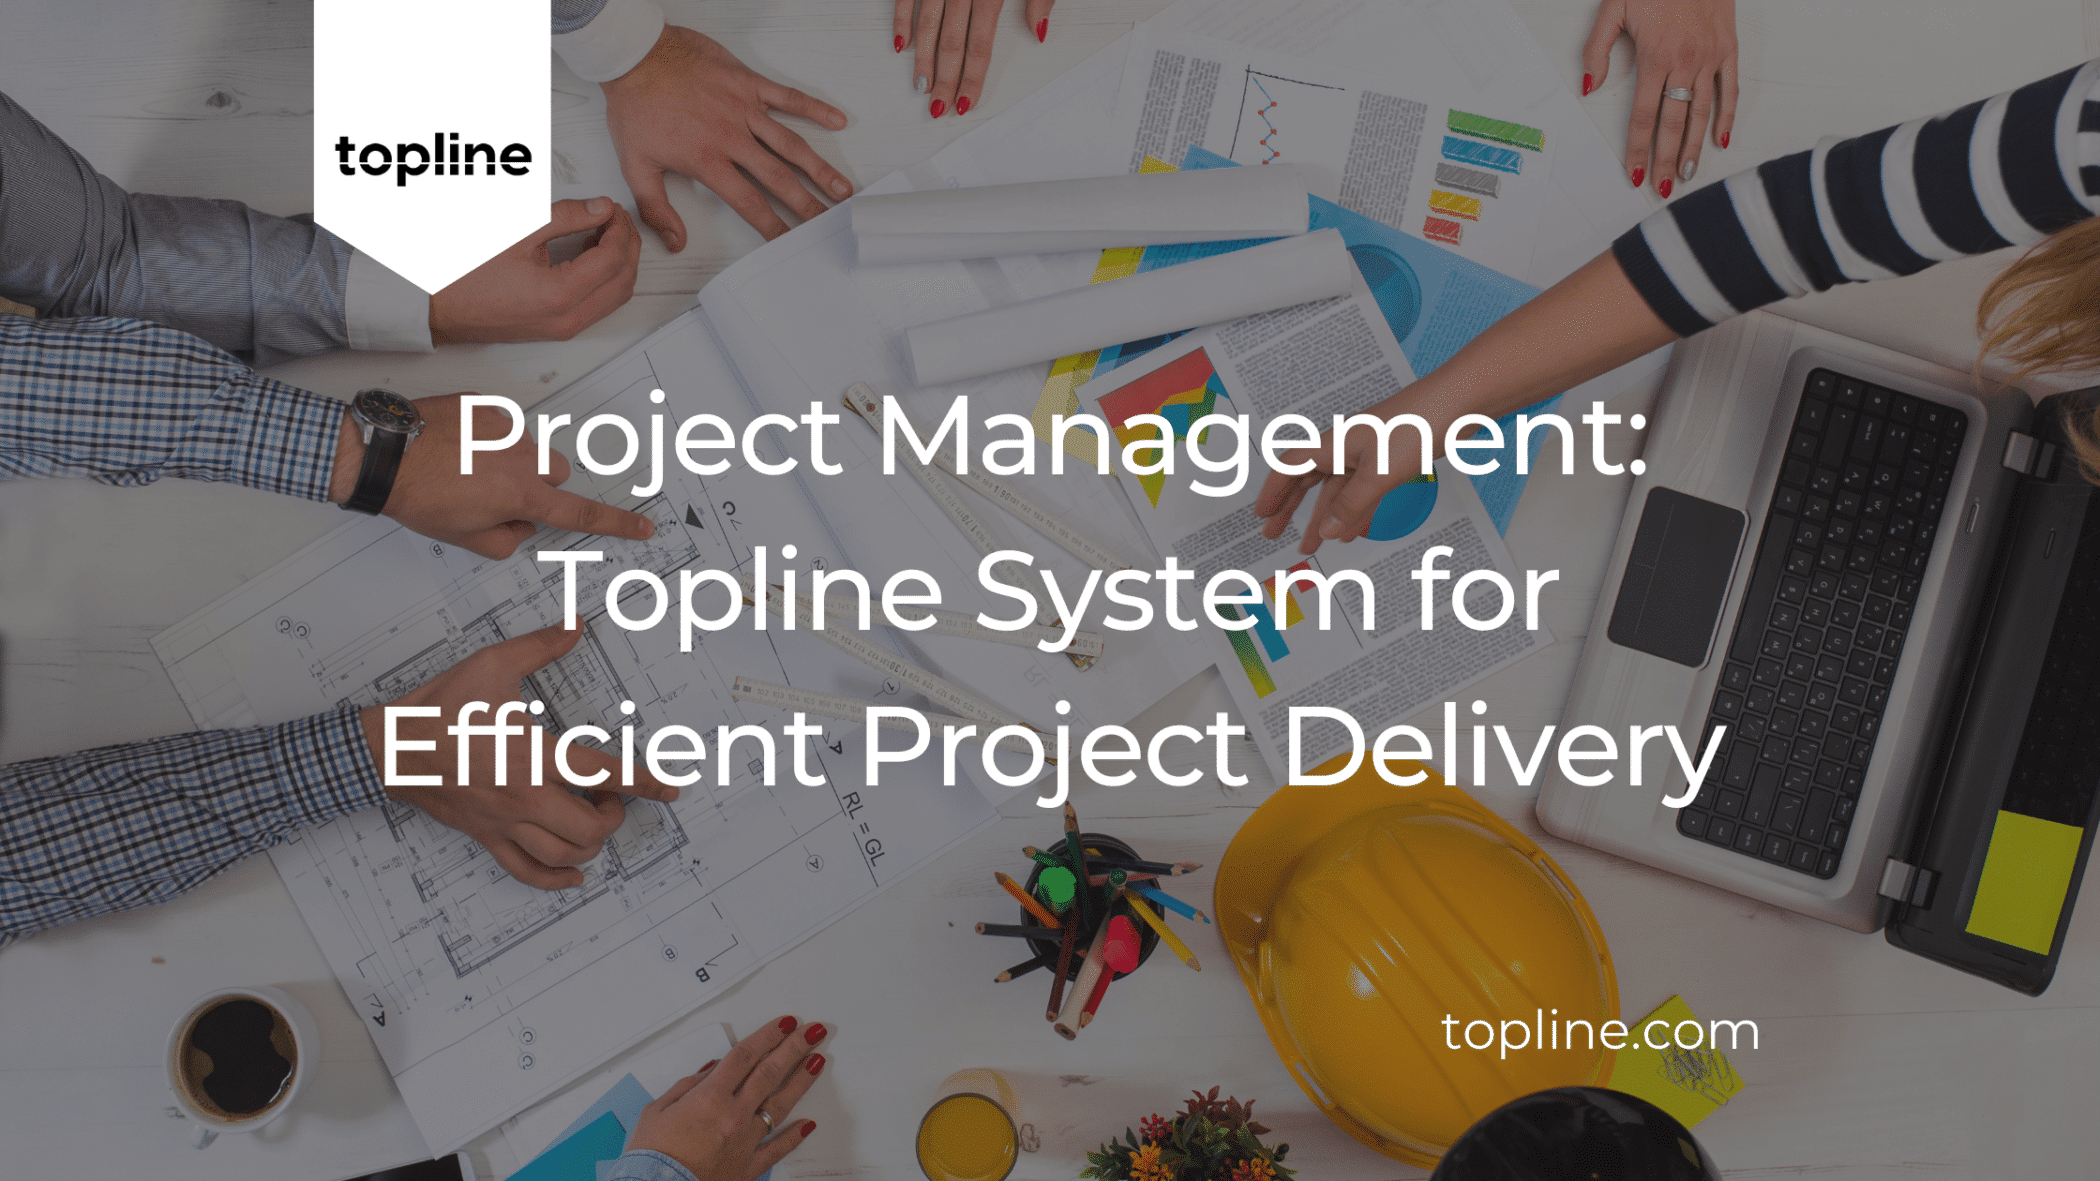 Project Management: Topline System for Efficient Project Delivery